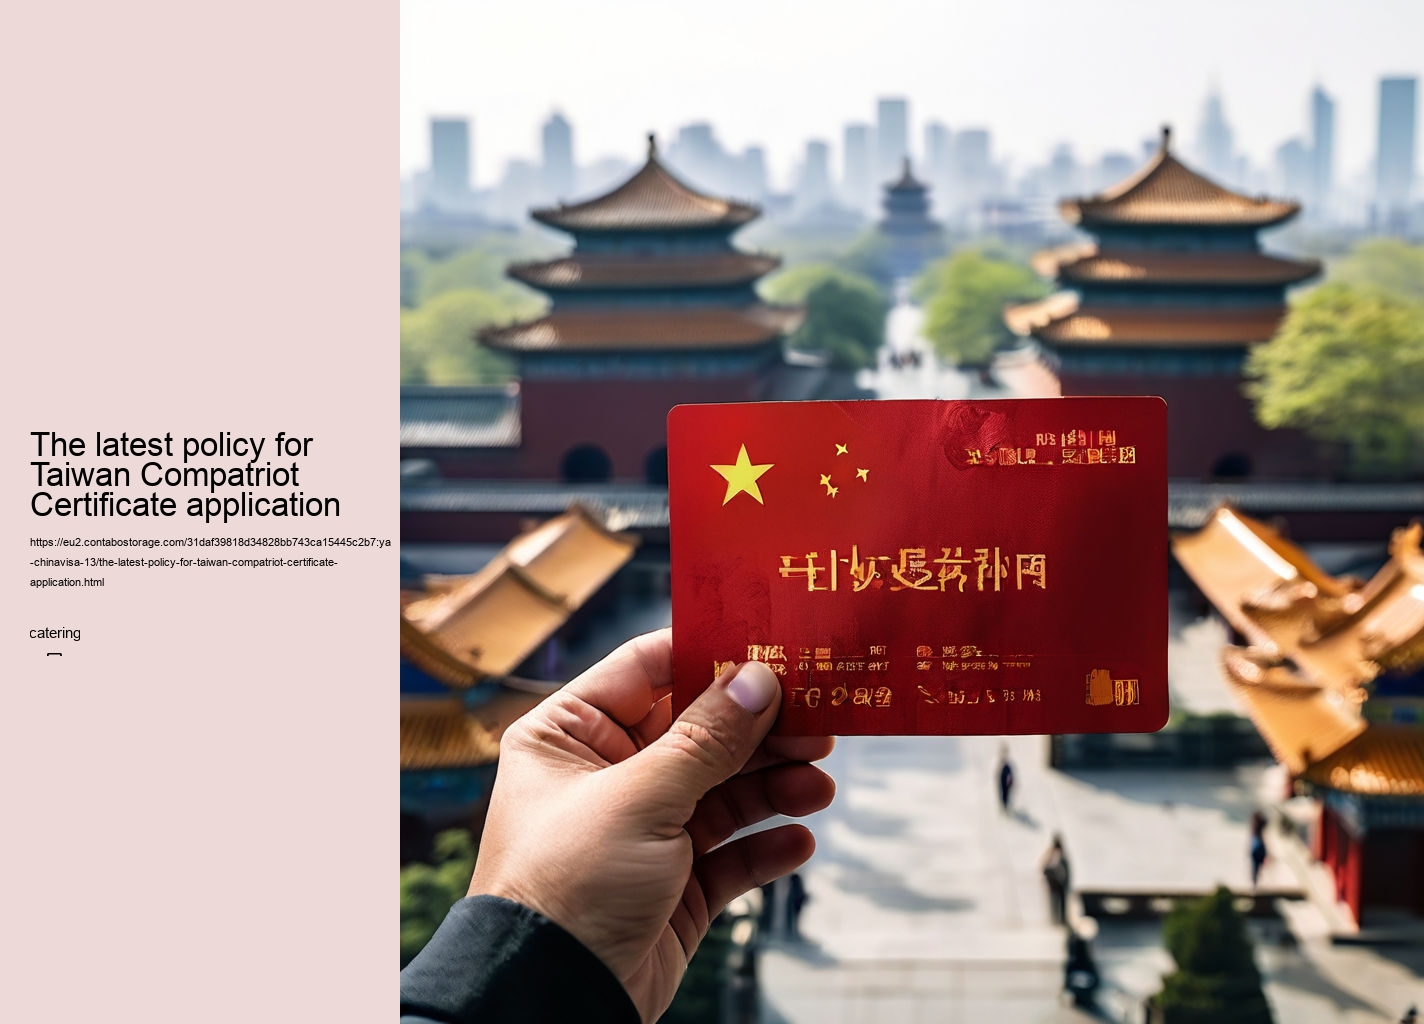 The latest policy for Taiwan Compatriot Certificate application